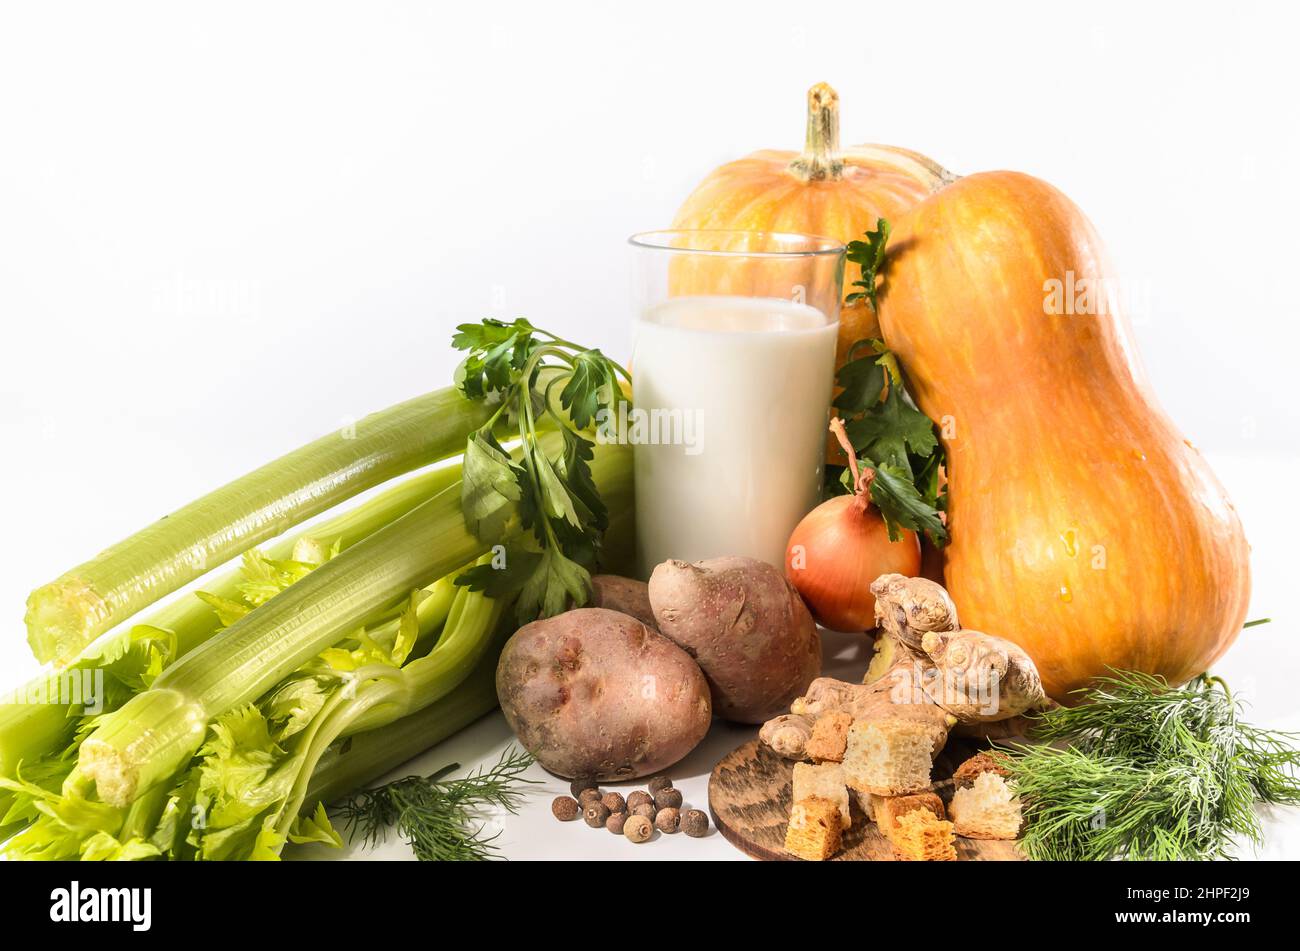 pumpkin, celery and other ingredients for pumpkin soup with breadcrumbs on a light background Stock Photo